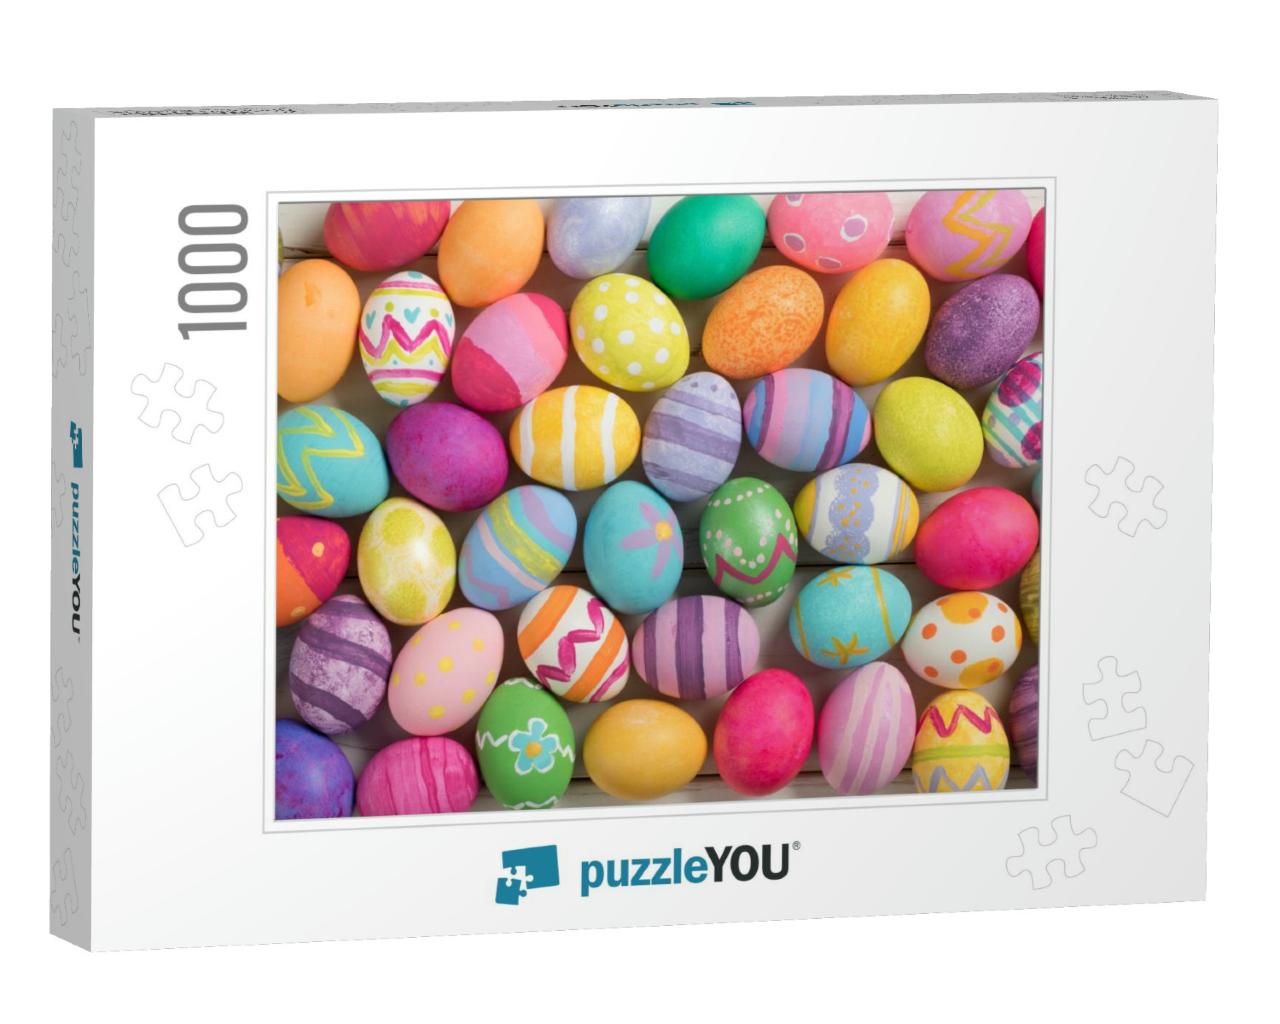 Many Bright & Colorful Easter Eggs Filling the Background... Jigsaw Puzzle with 1000 pieces